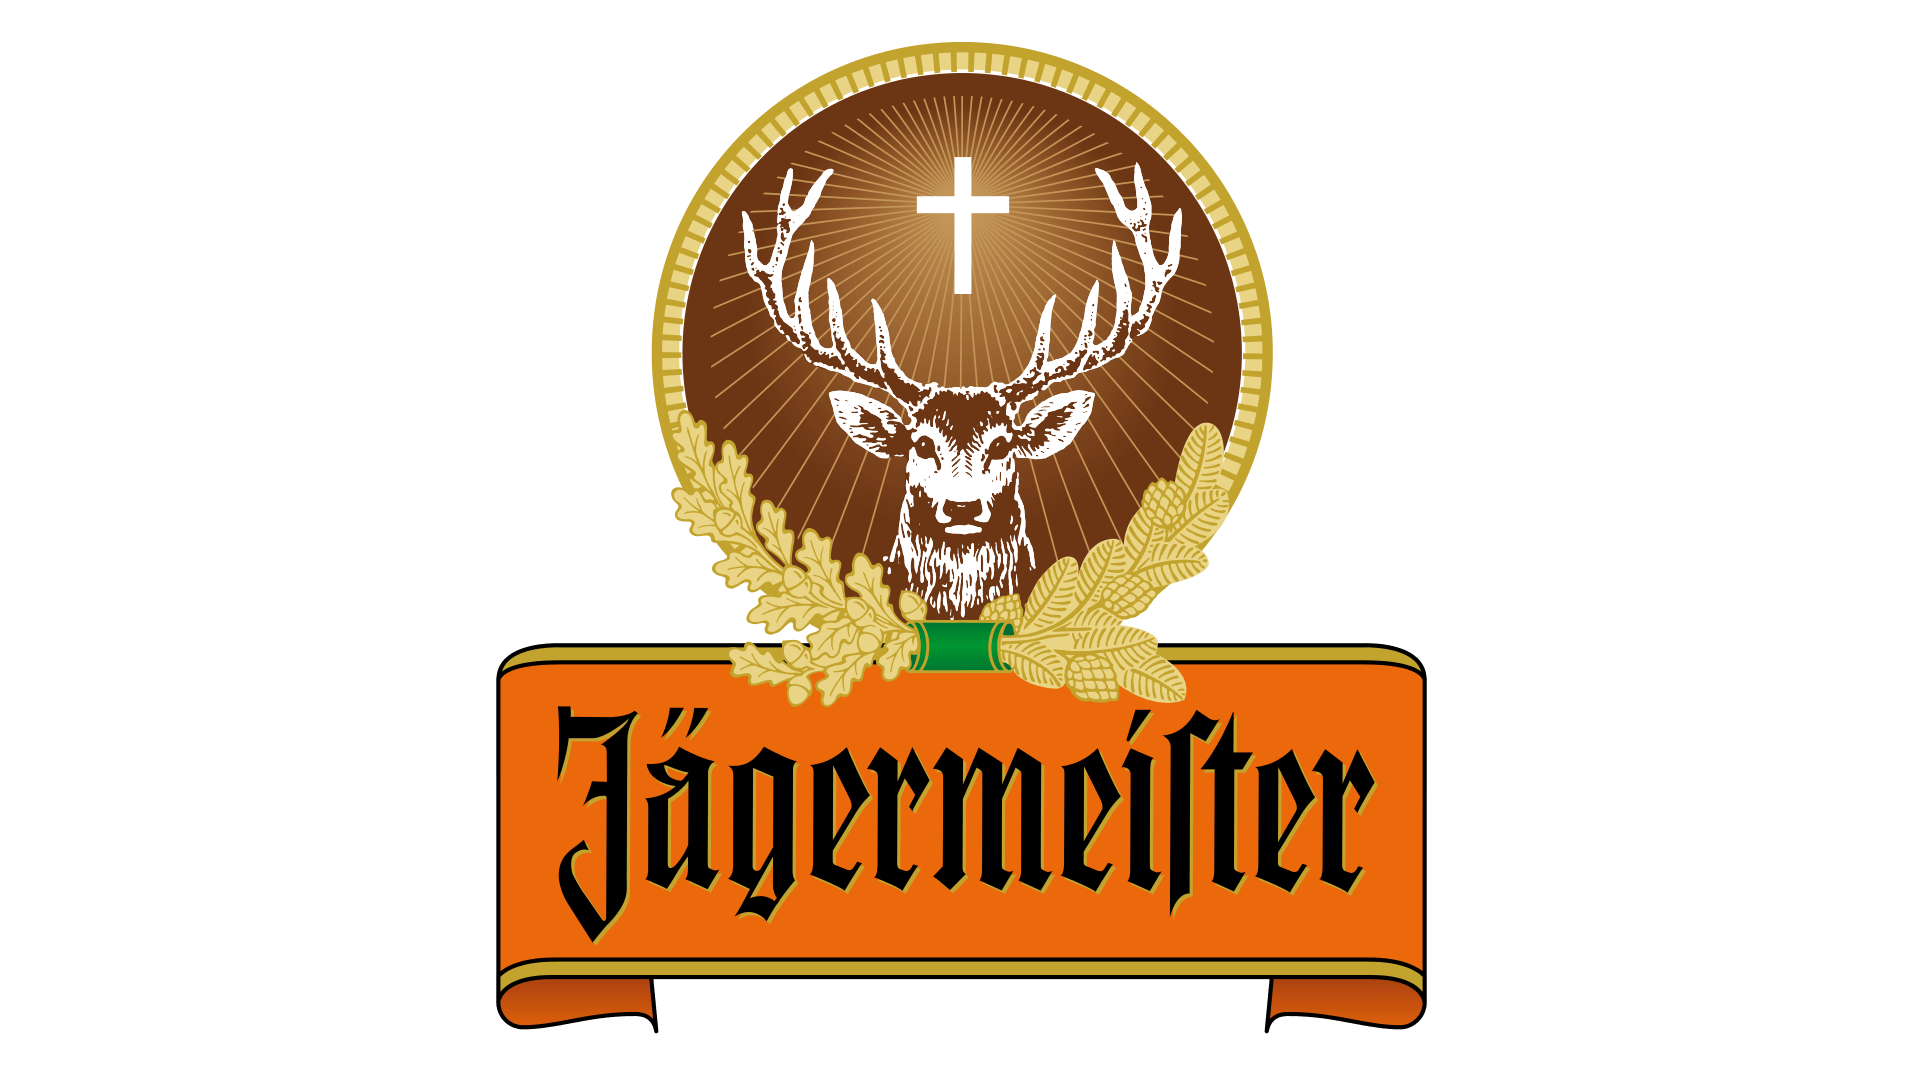 Jagermeister Logo - Jagermeister Logo, Jagermeister Symbol, Meaning, History and Evolution